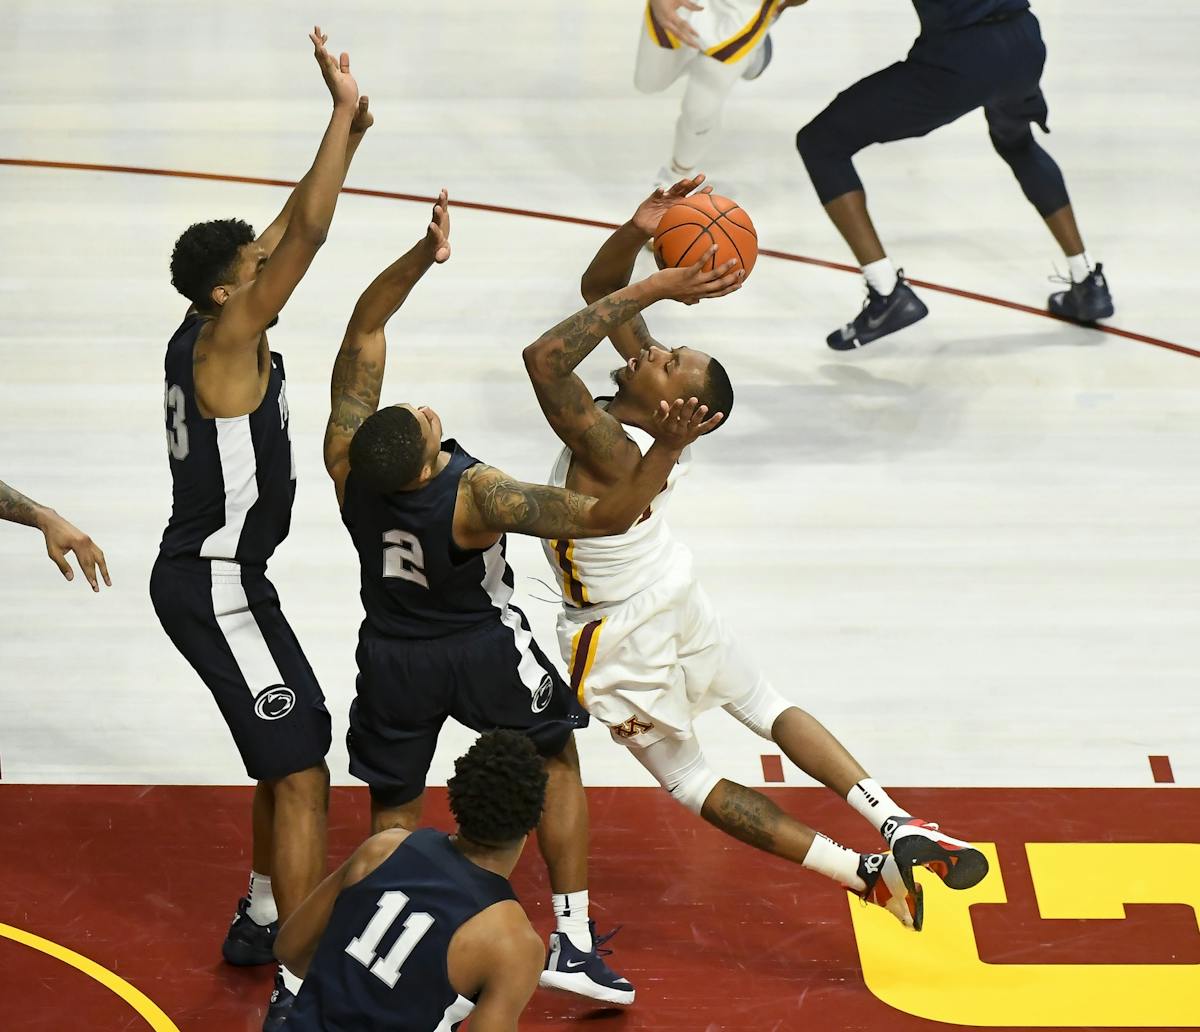 Minnesota Golden Gophers guard Dupree McBrayer (1) drew contact on a foul by Penn State Nittany Lions guard Myles Dread (2) with seconds left in the s